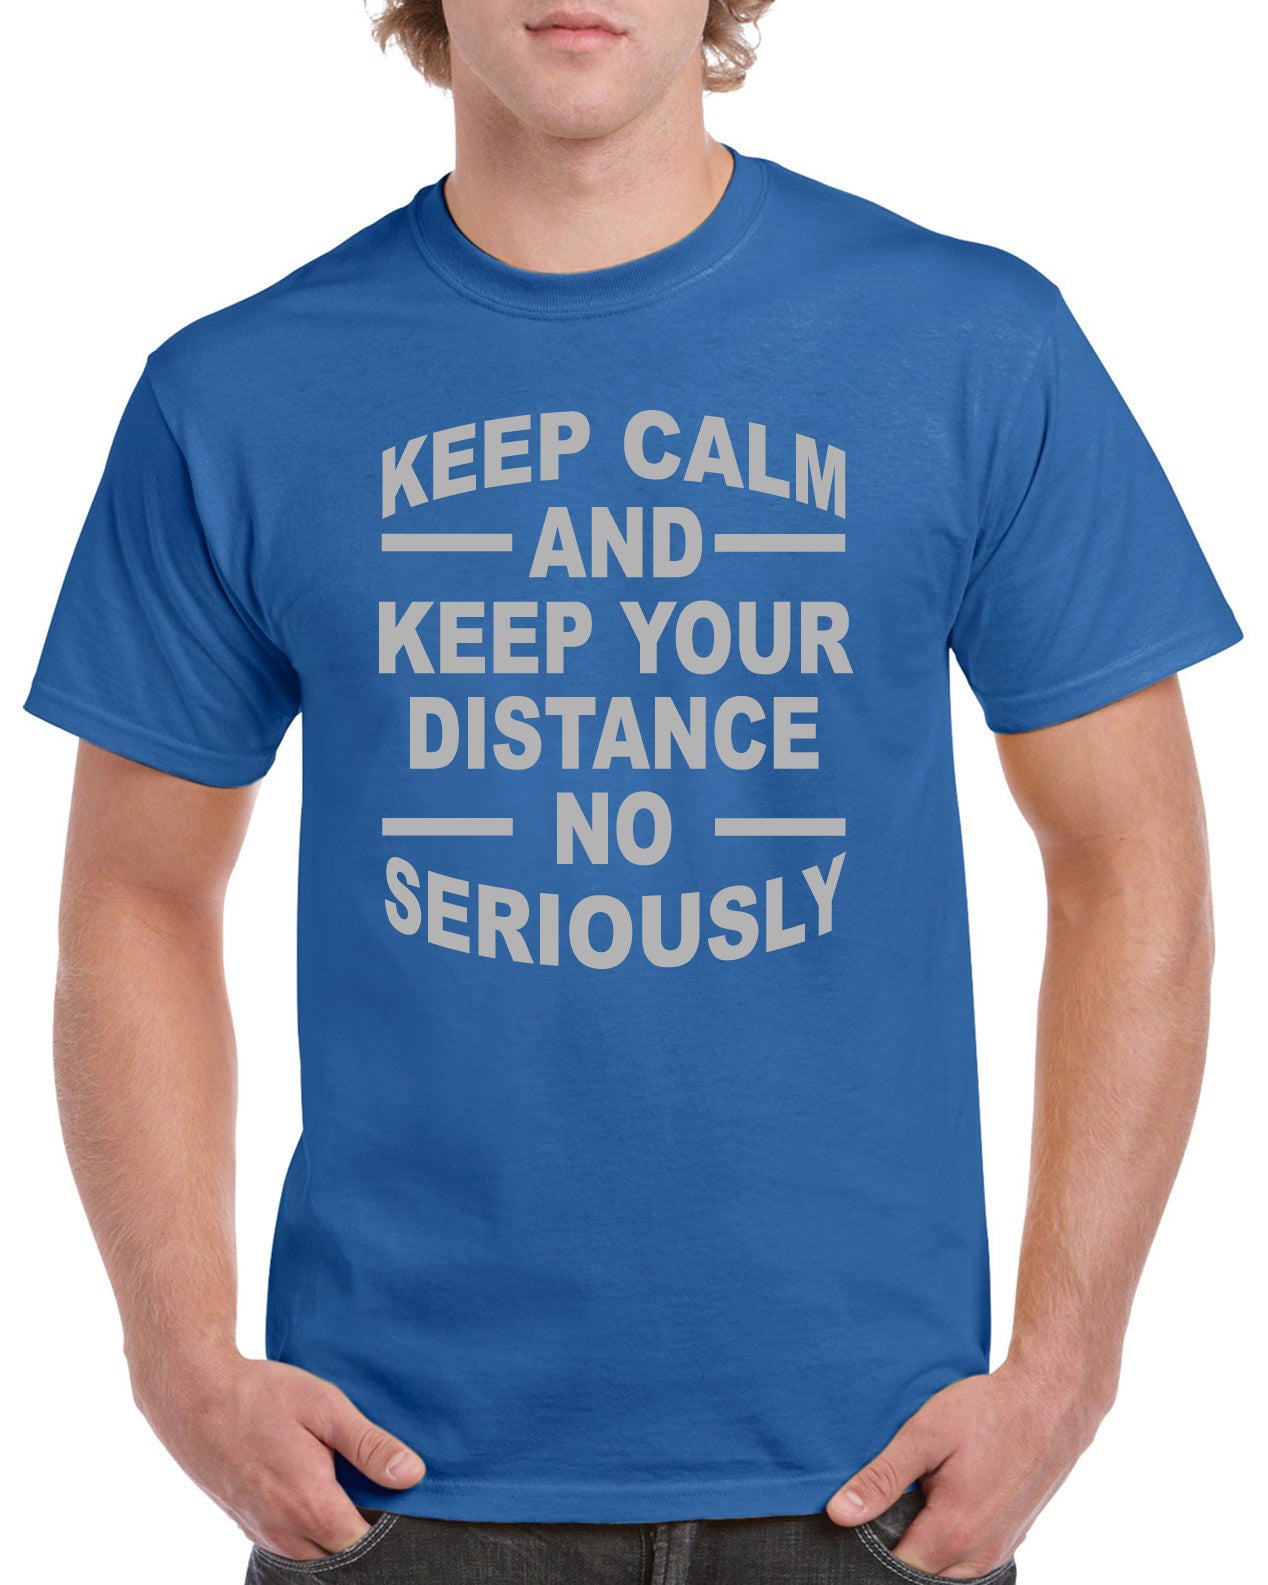 Keep Calm and Keep Your Distance Funny Graphic Design Shirt ...